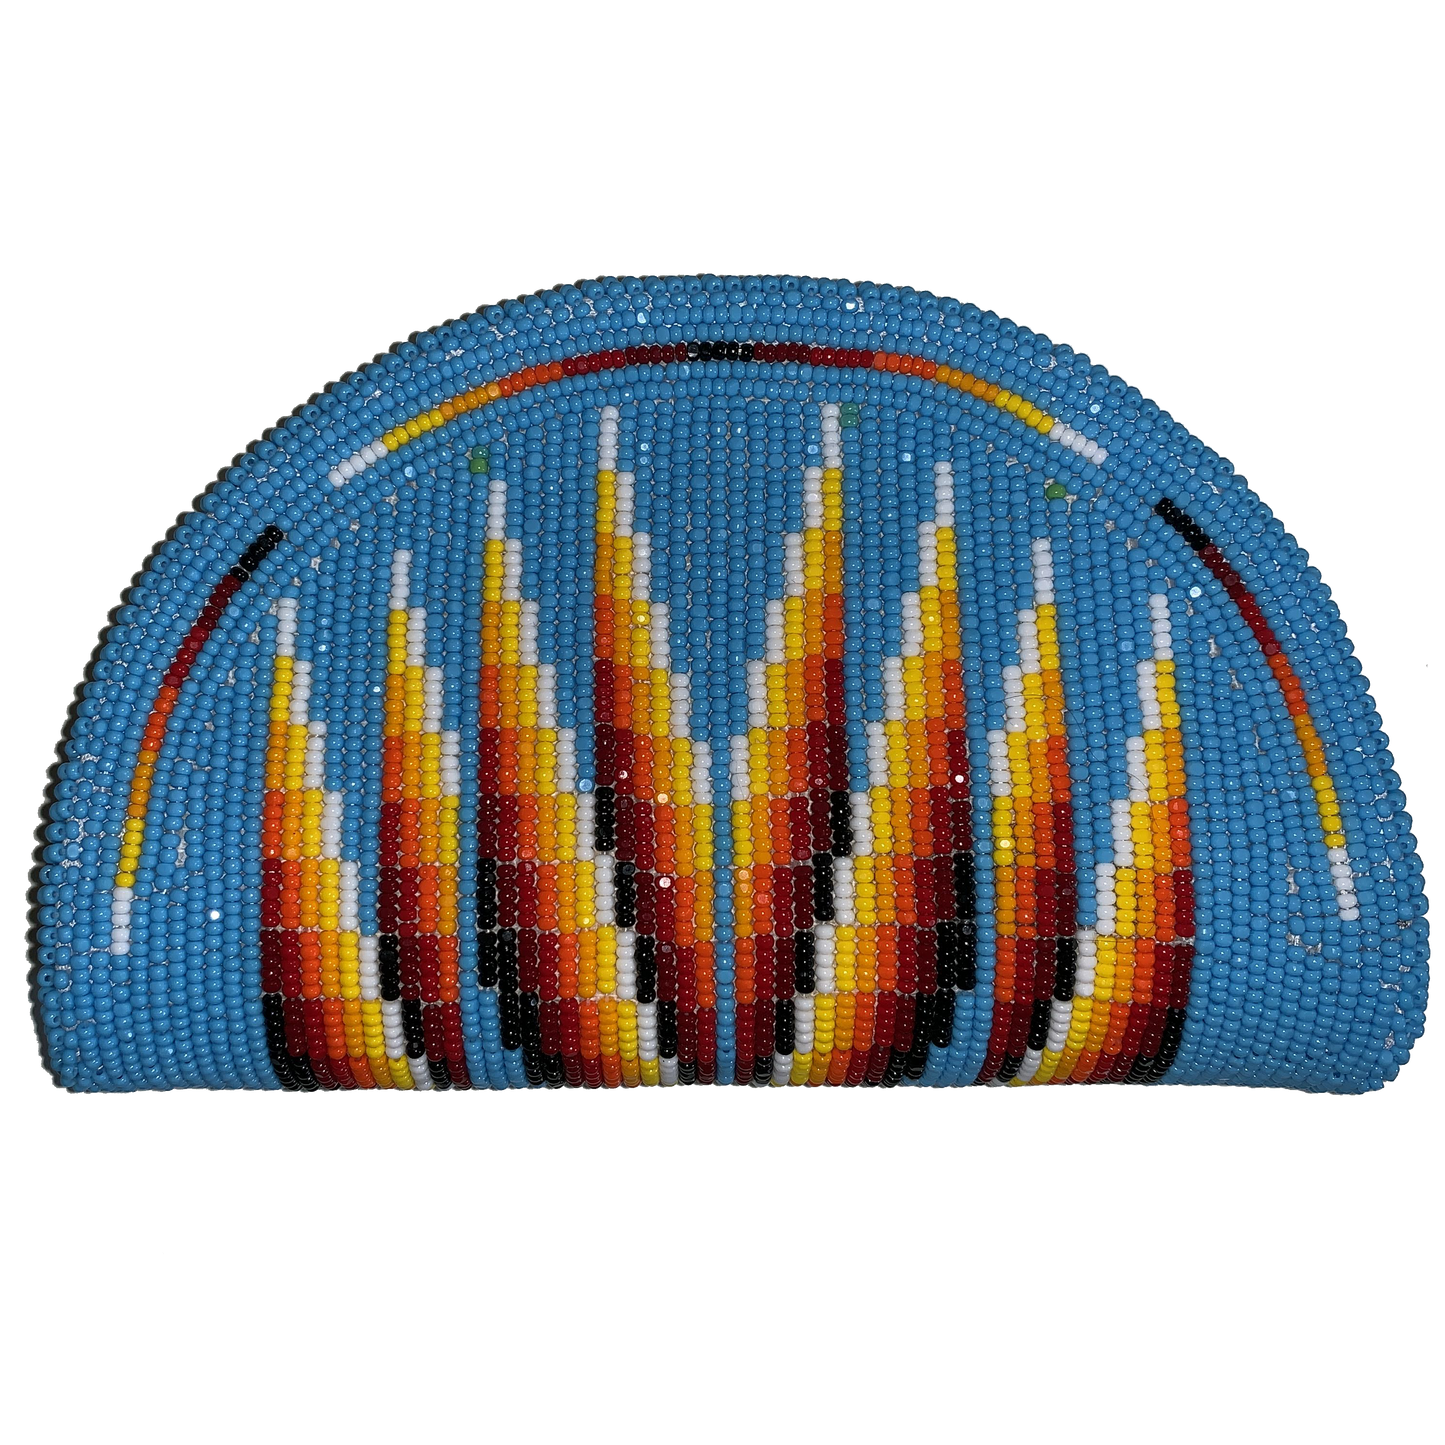 Light Blue Beaded Purse on Smoked Buckskin - Intertribal Creatives by Running Strong for American Indian Youth